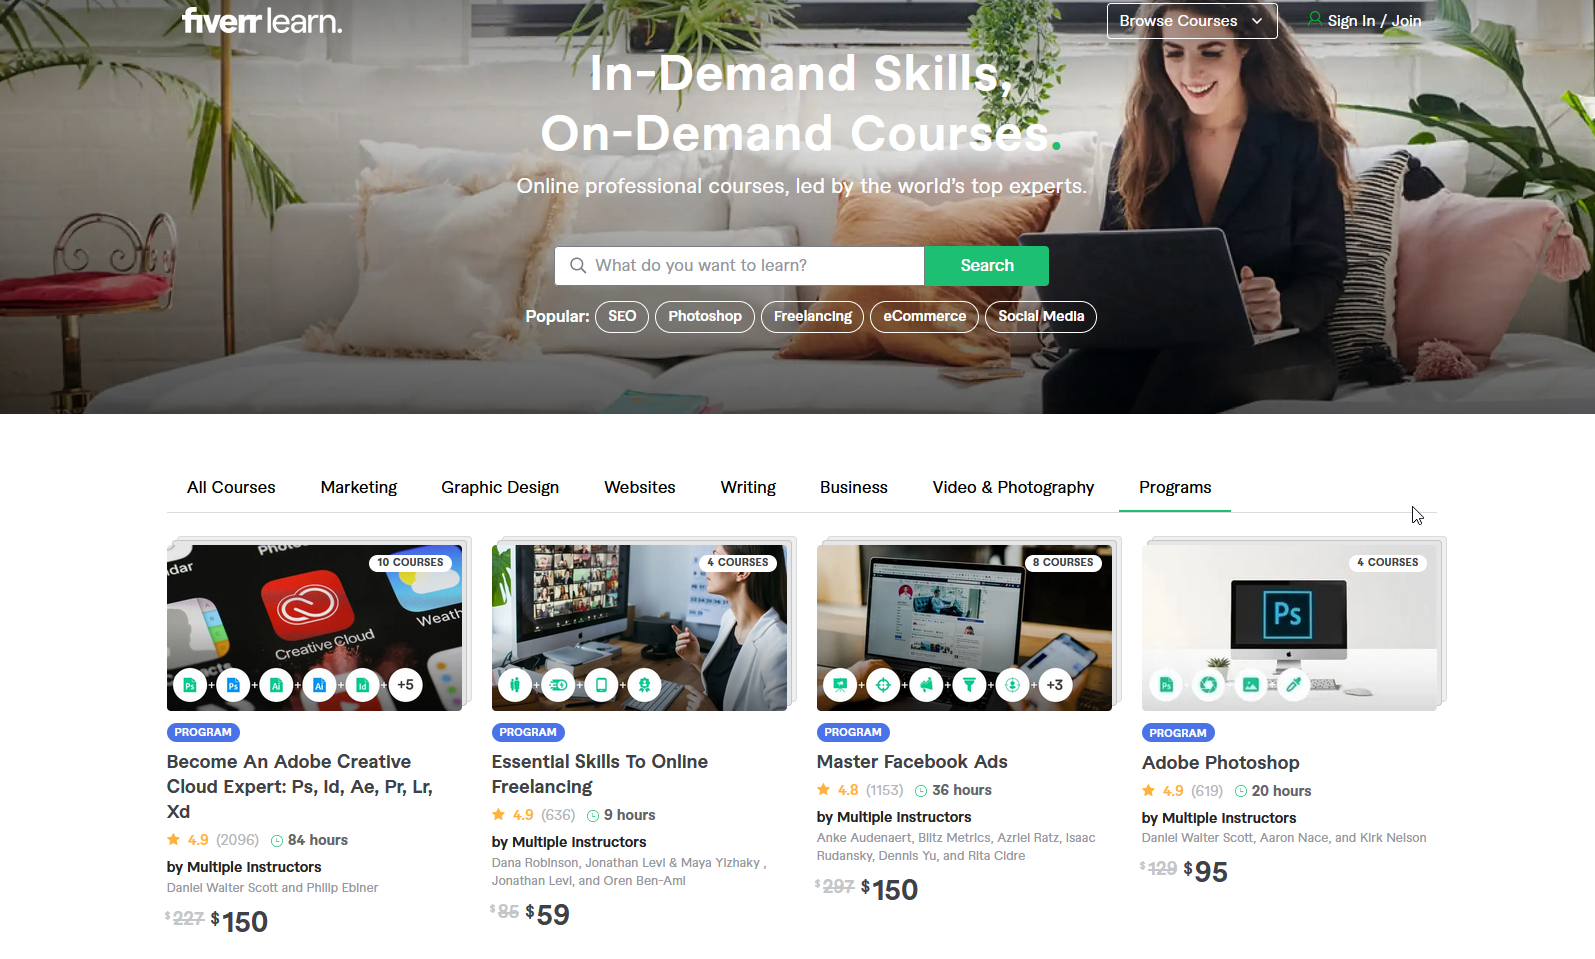 Online IT courses for beginners on Fiverr Learn.